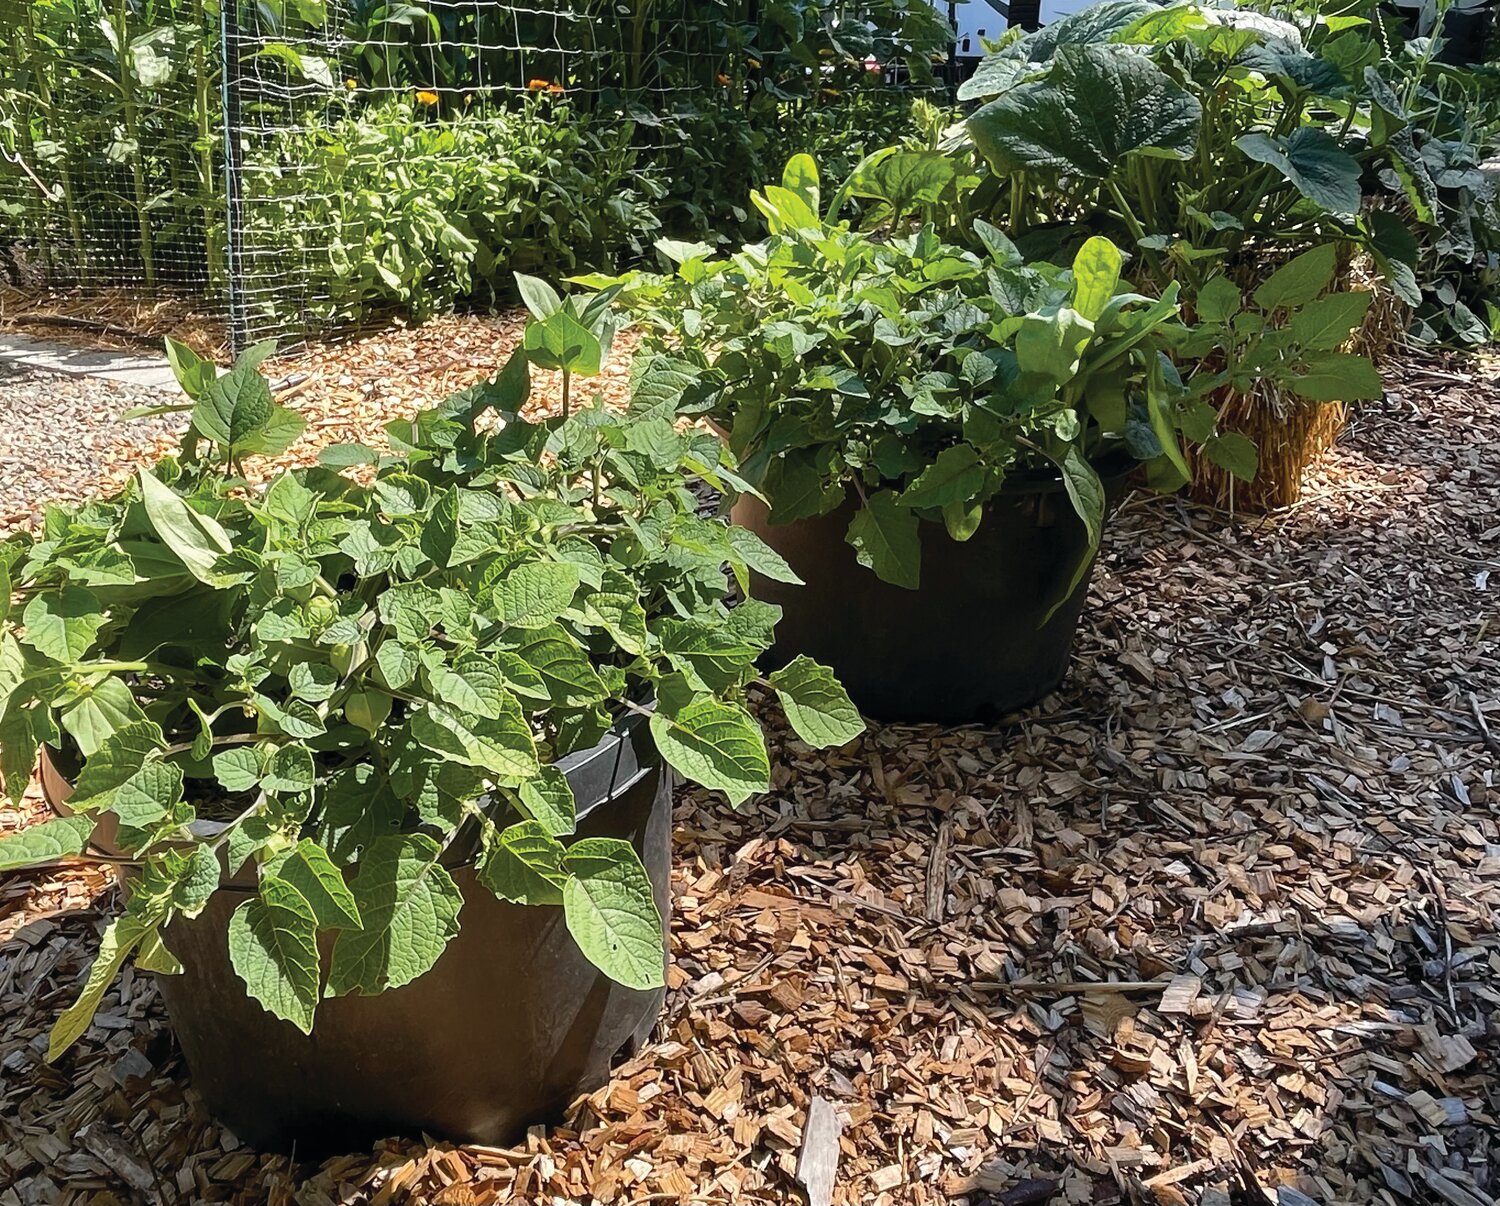 “Aunt Molly” ground cherries in the foreground and “Honey Boat” delicata squash in the back, along with “Bird House” gourds in the center. In the background, corn and sunflowers are planted in the ground. Group plants with similar needs for sunlight and water.